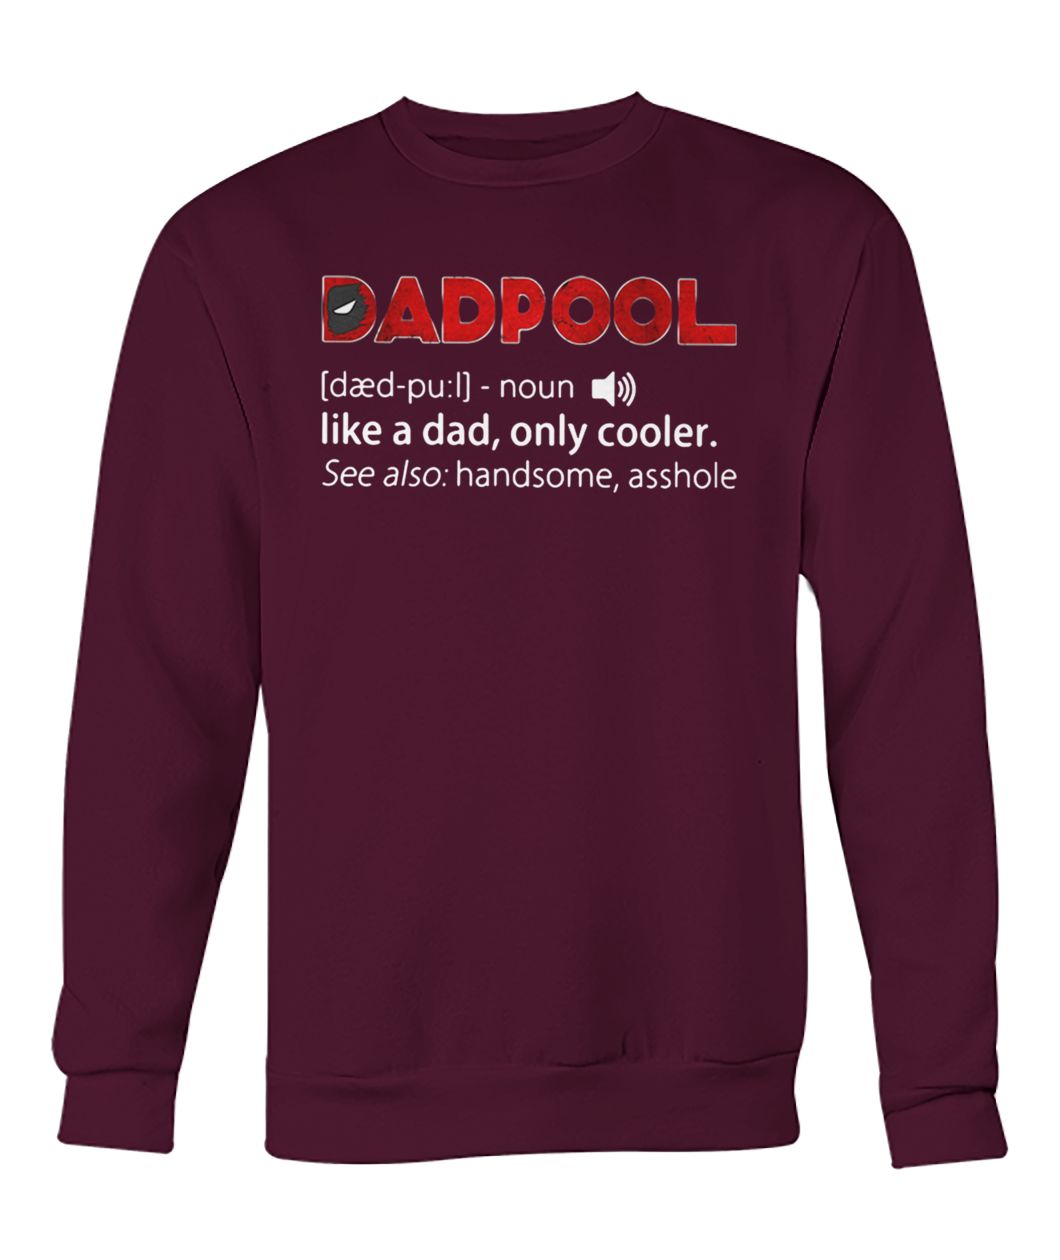 Dadpool definition meaning like a dad only cooler see also handsome asshole crew neck sweatshirt